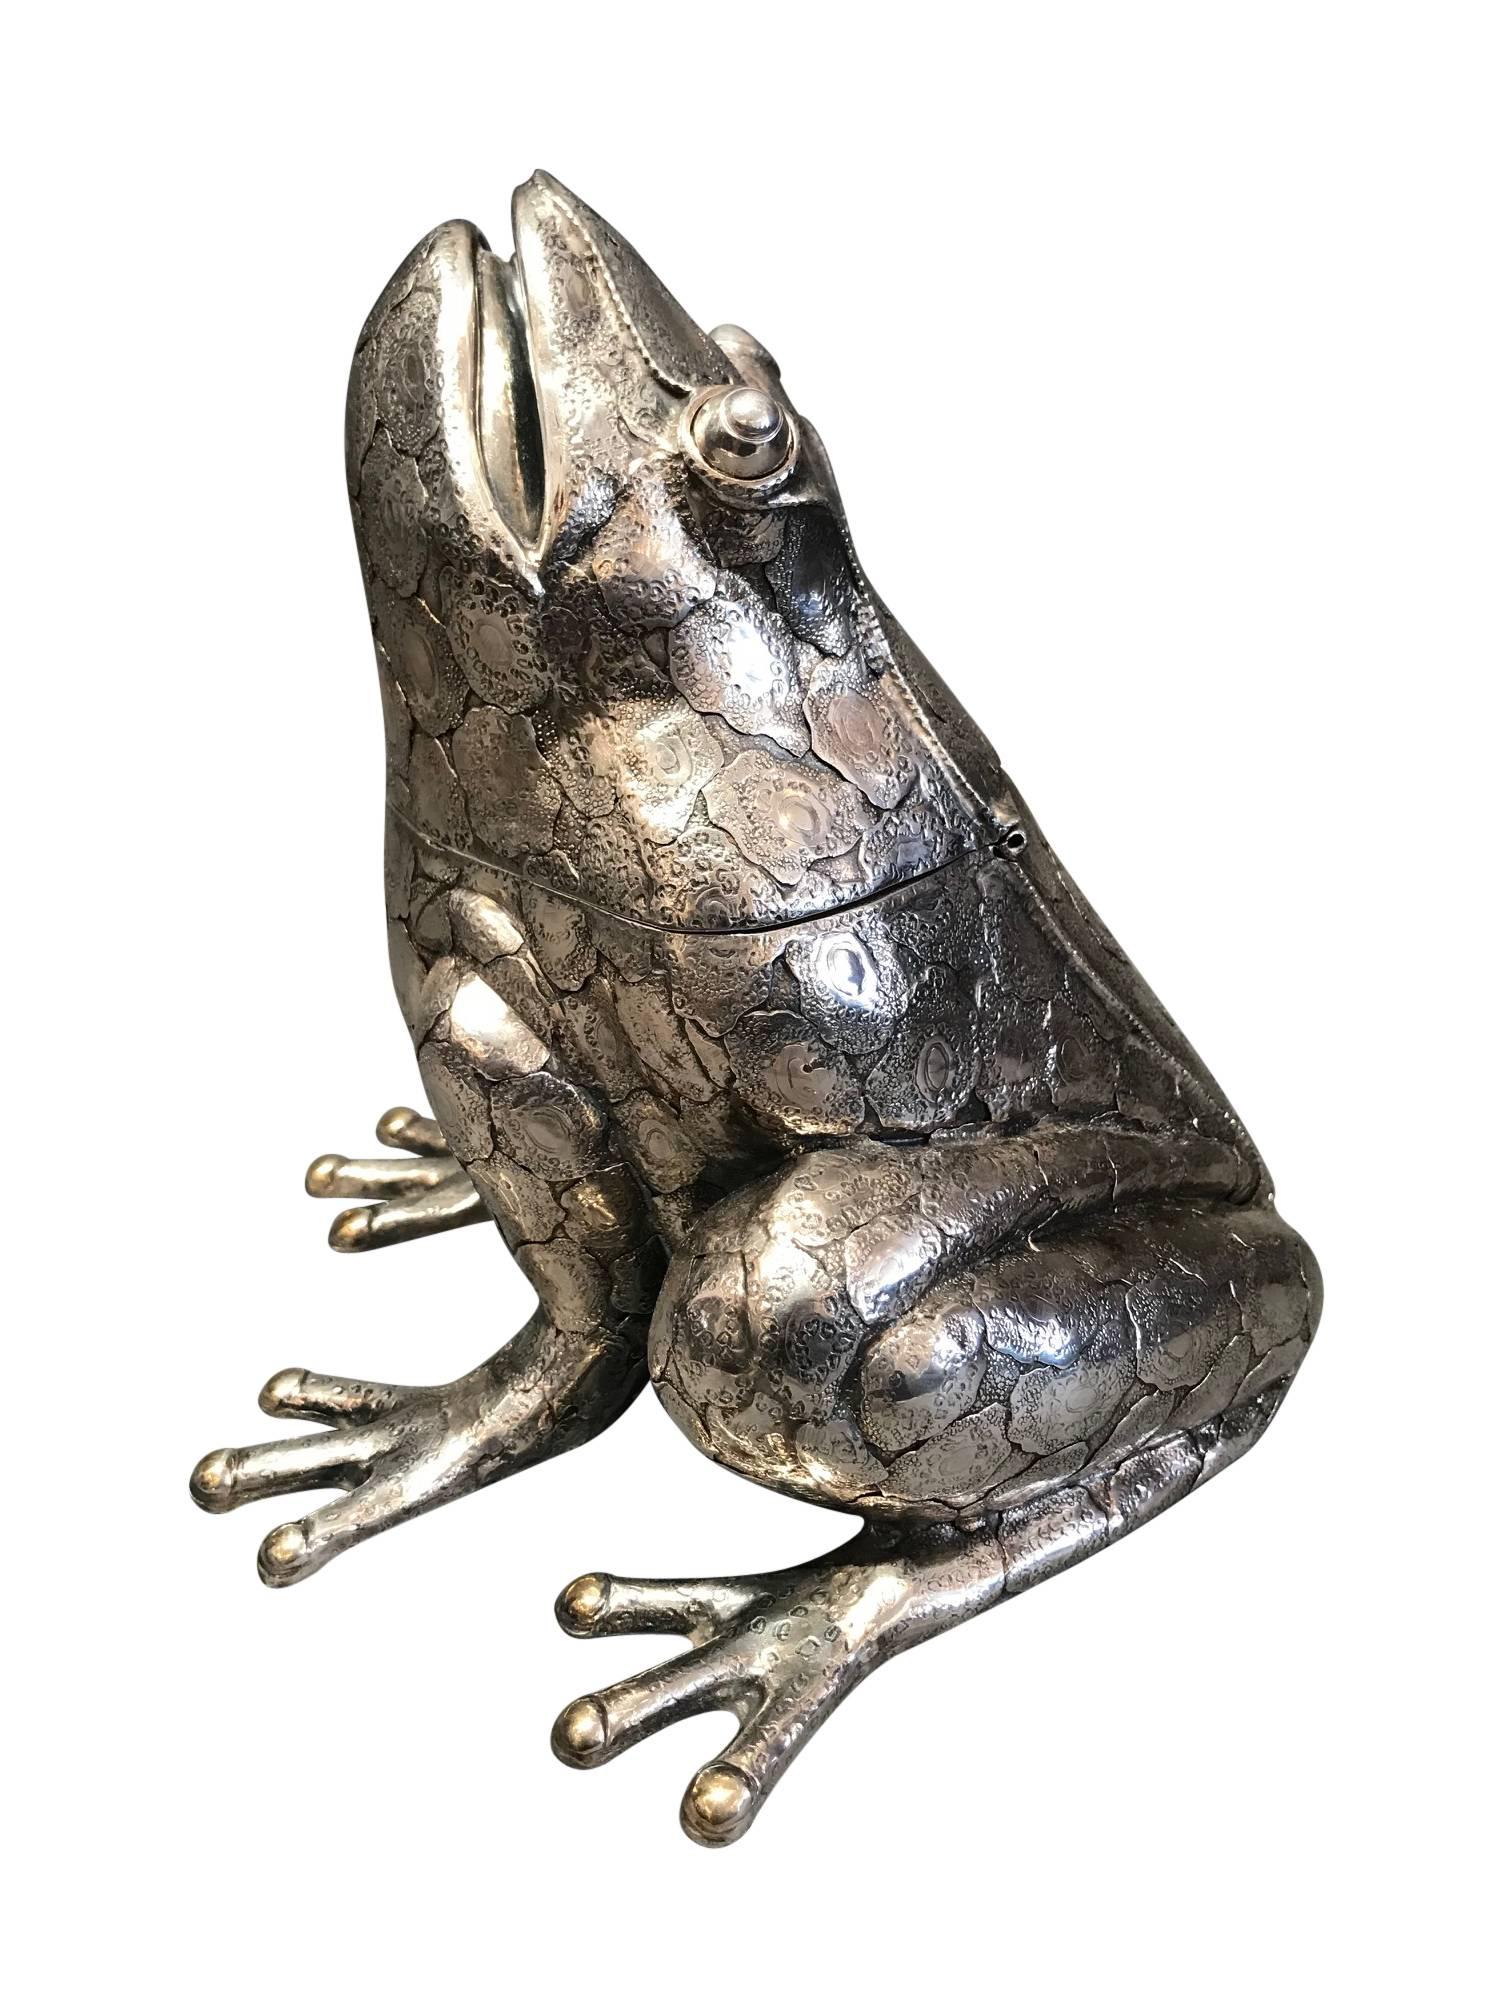 A rare silver sculpture of a toad with hinged head by Mario Buccellati, circa 1950. Stamped M.Buccellati 925.

In 1919 Mario Buccellati opened his activity and, after the establishment of stores in Milan, Rome, Florence, began the development of